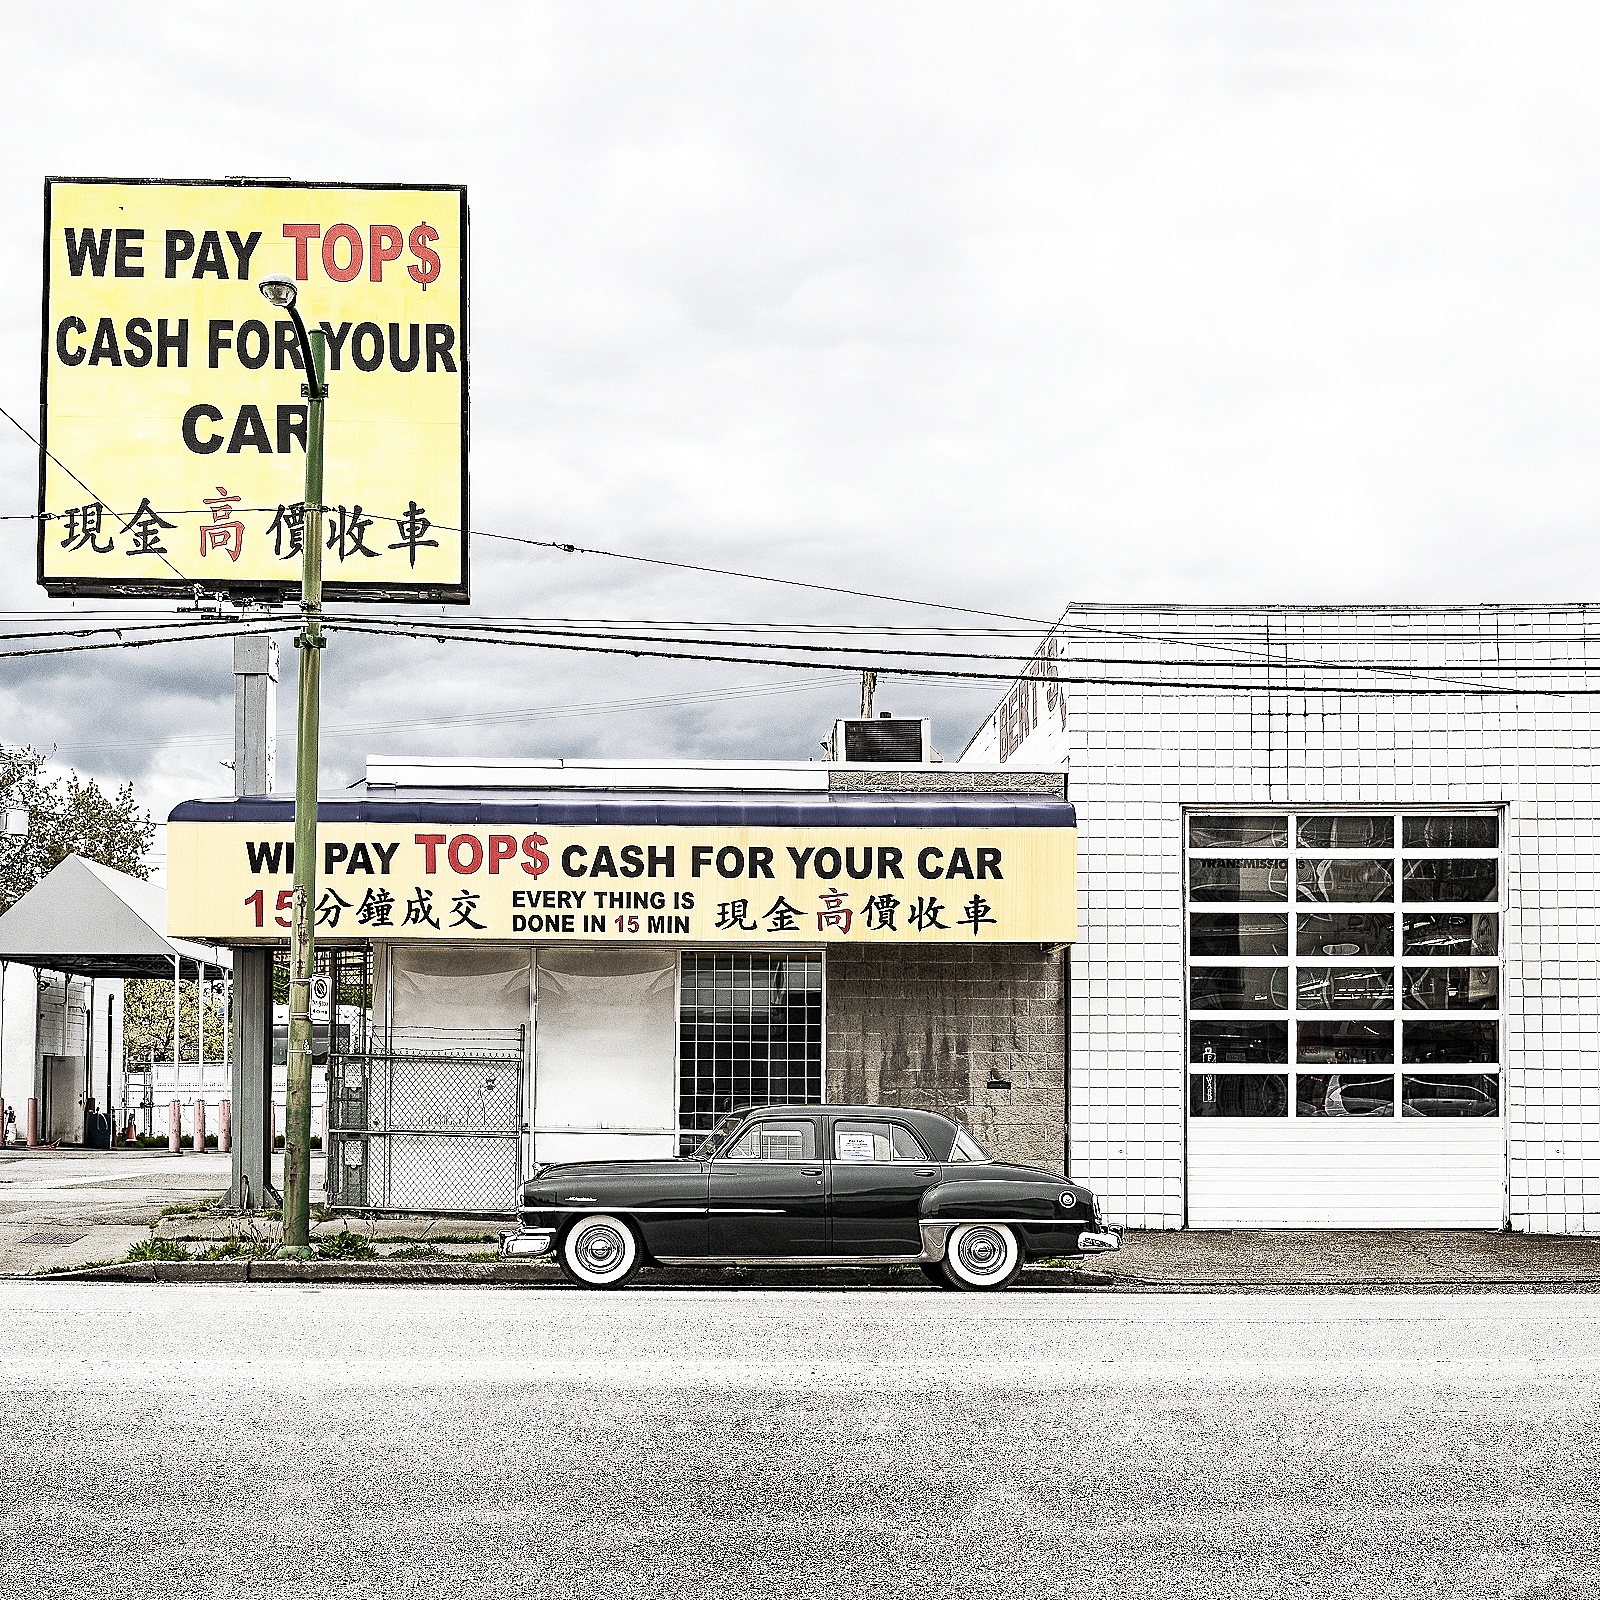 Cash For Your Car